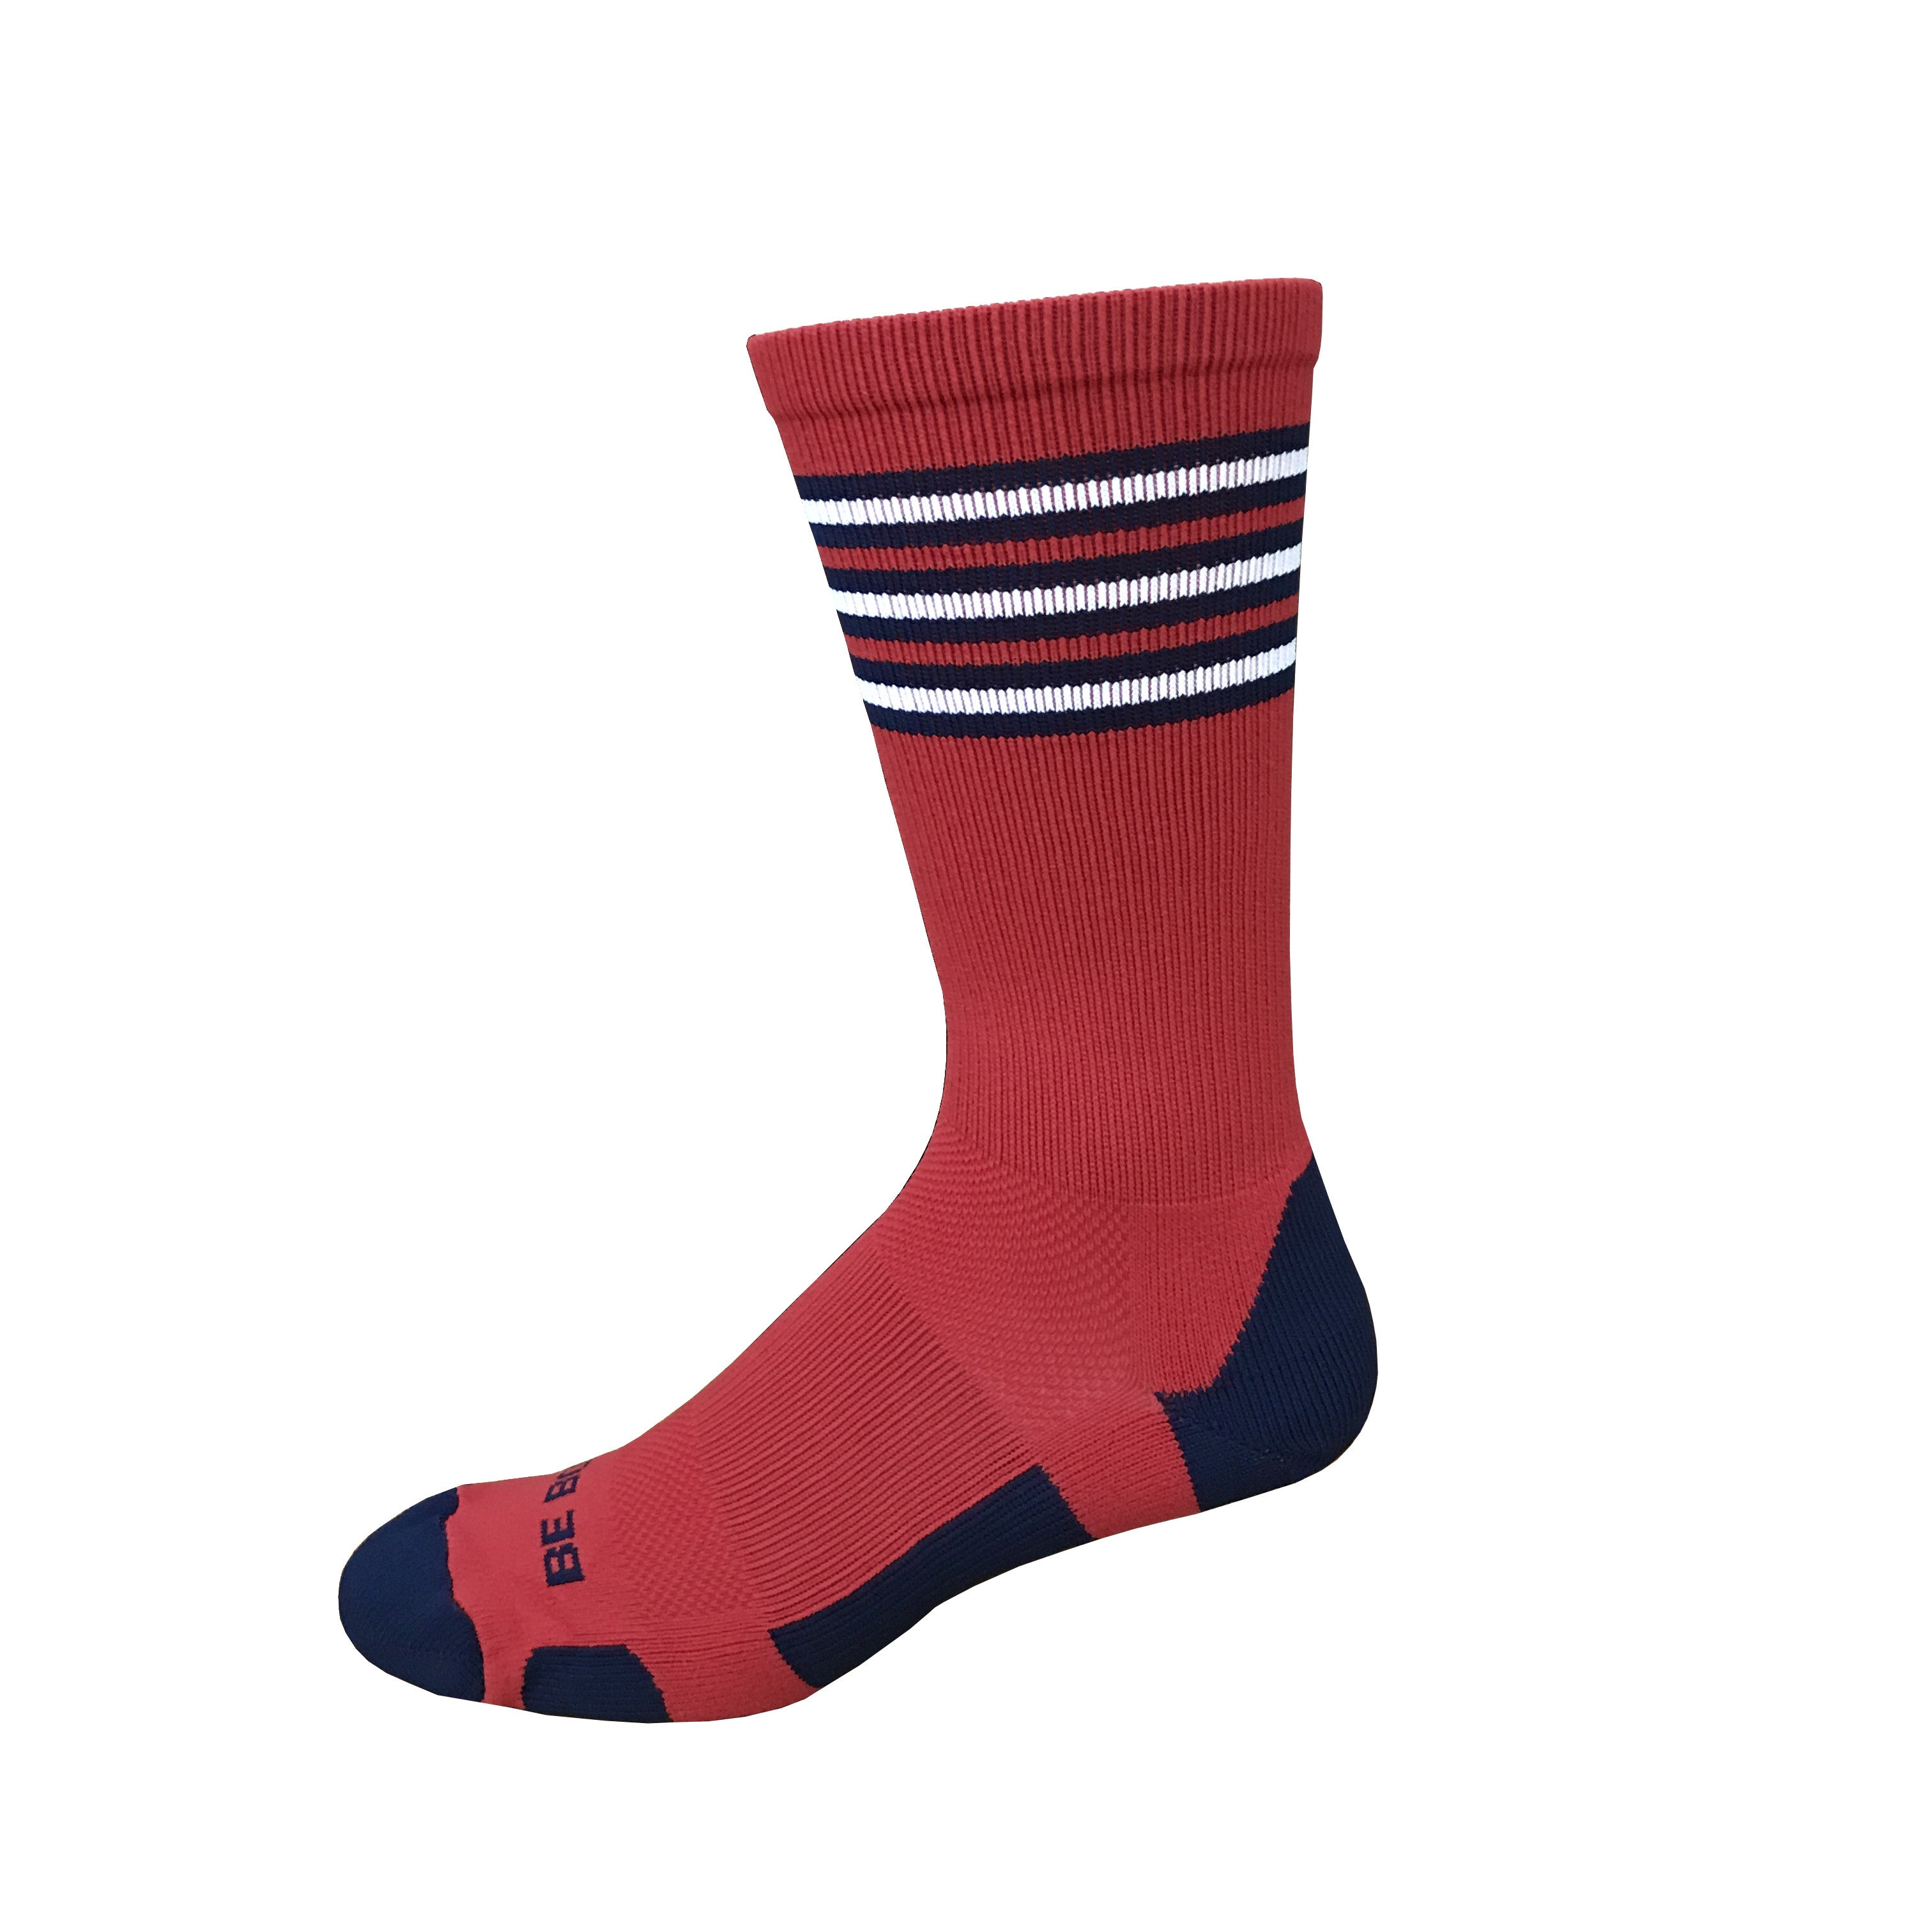 Rookie - Red & Navy. USA Made Old School Gym Athletic Socks